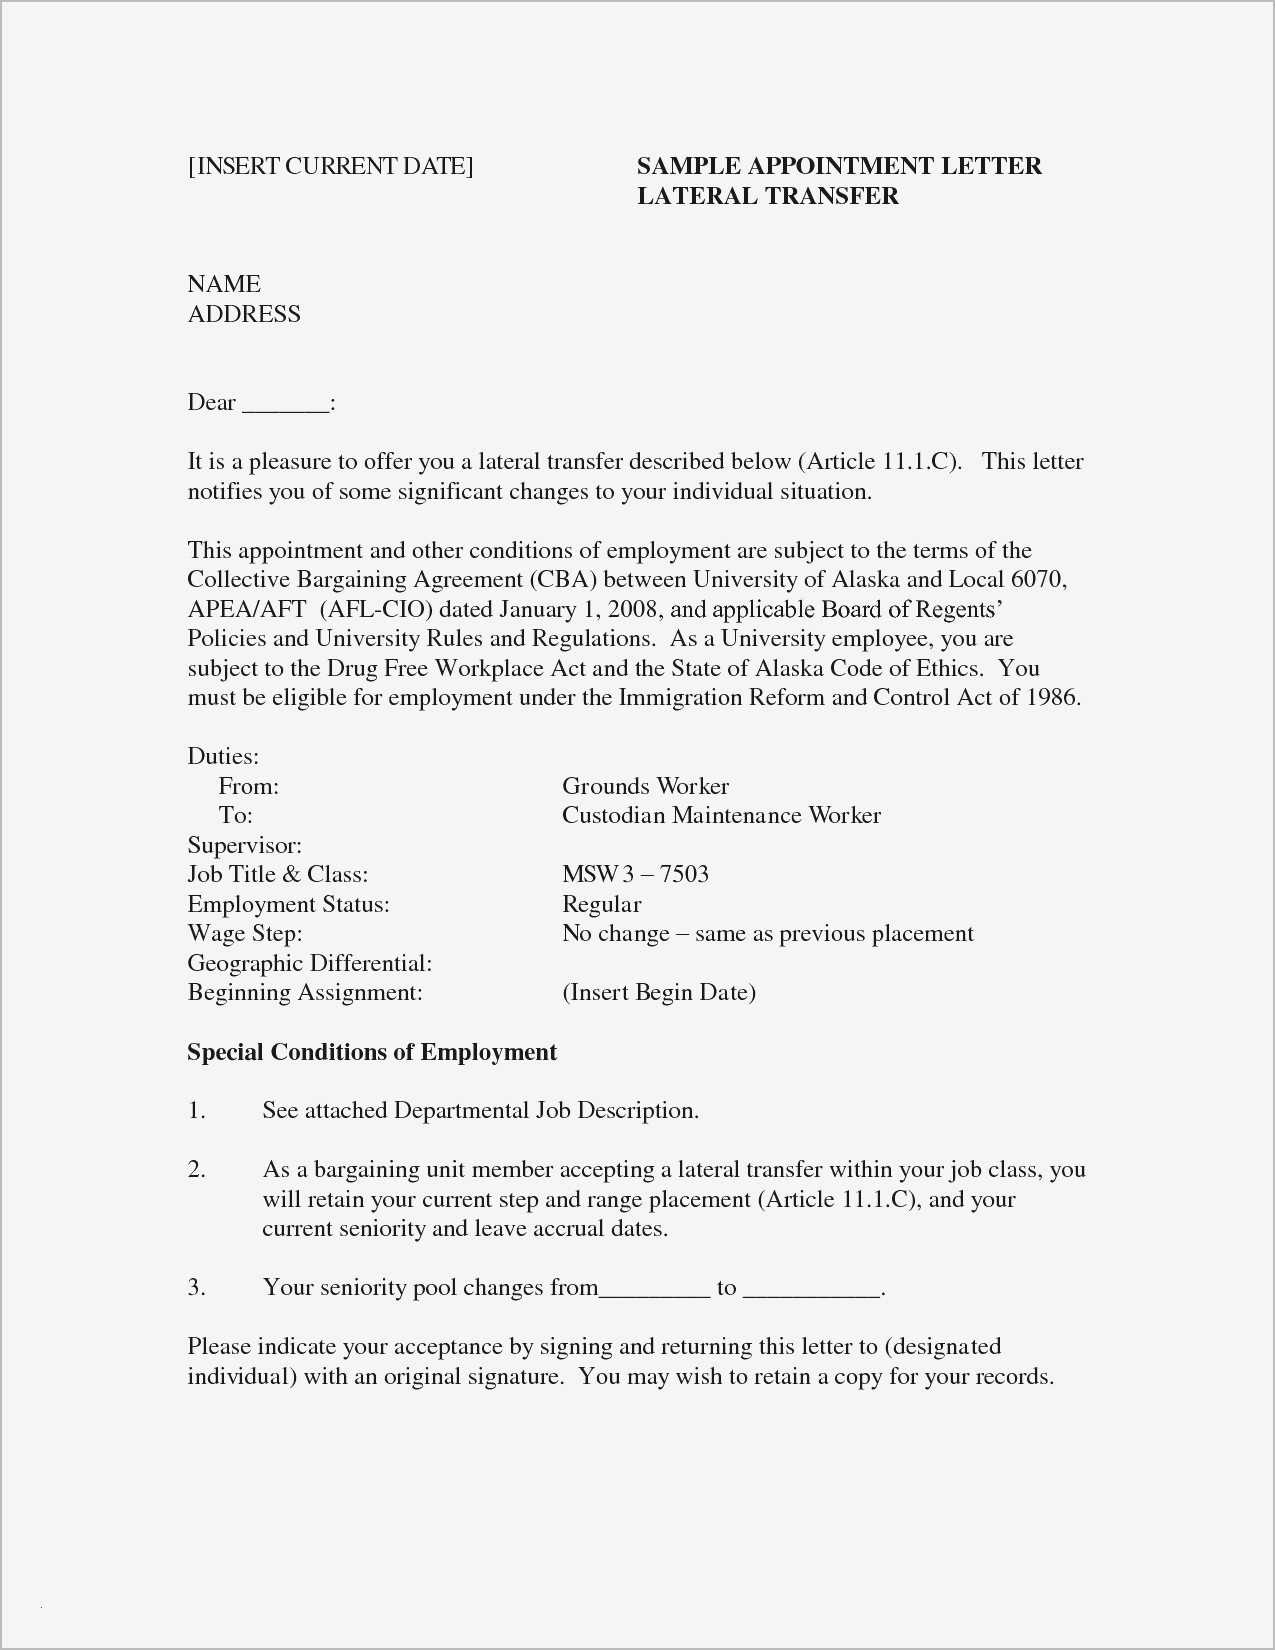 Professional Letter Template Word - Professional Resume Templates Word Legalsocialmobilitypartnership